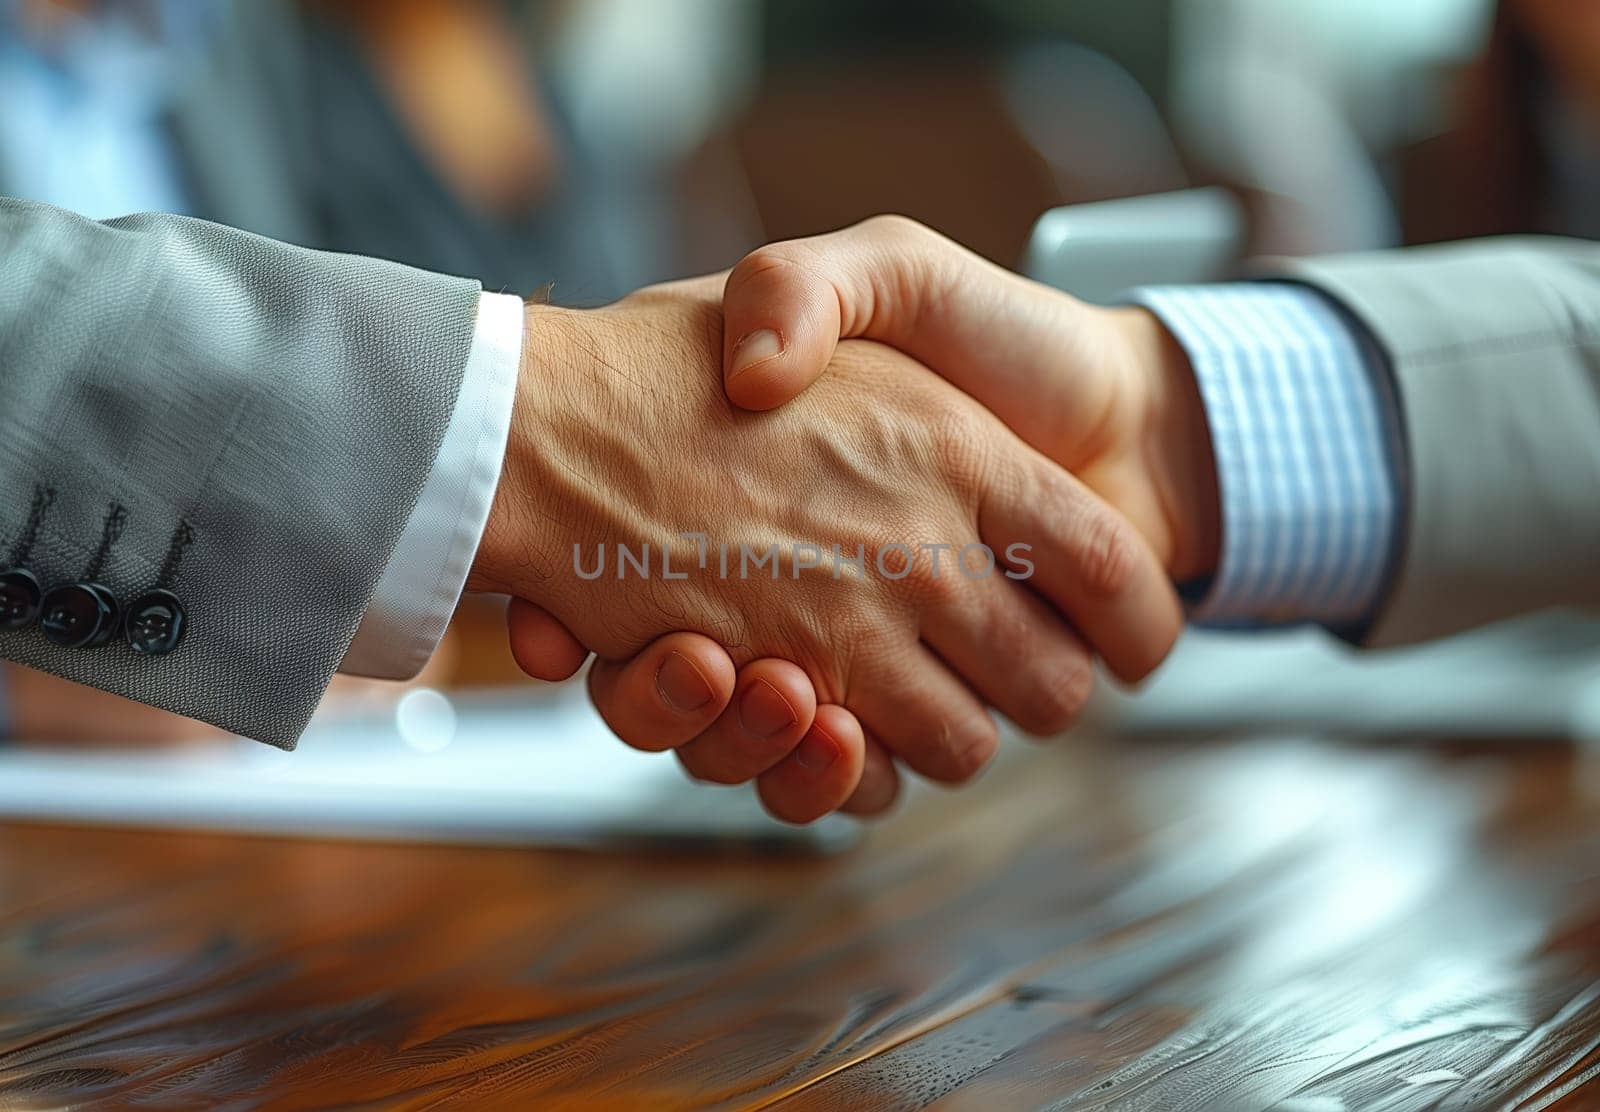 Two individuals are exchanging a firm handshake across a sturdy wooden table, showcasing a gesture of agreement and respect on the hardwood surface